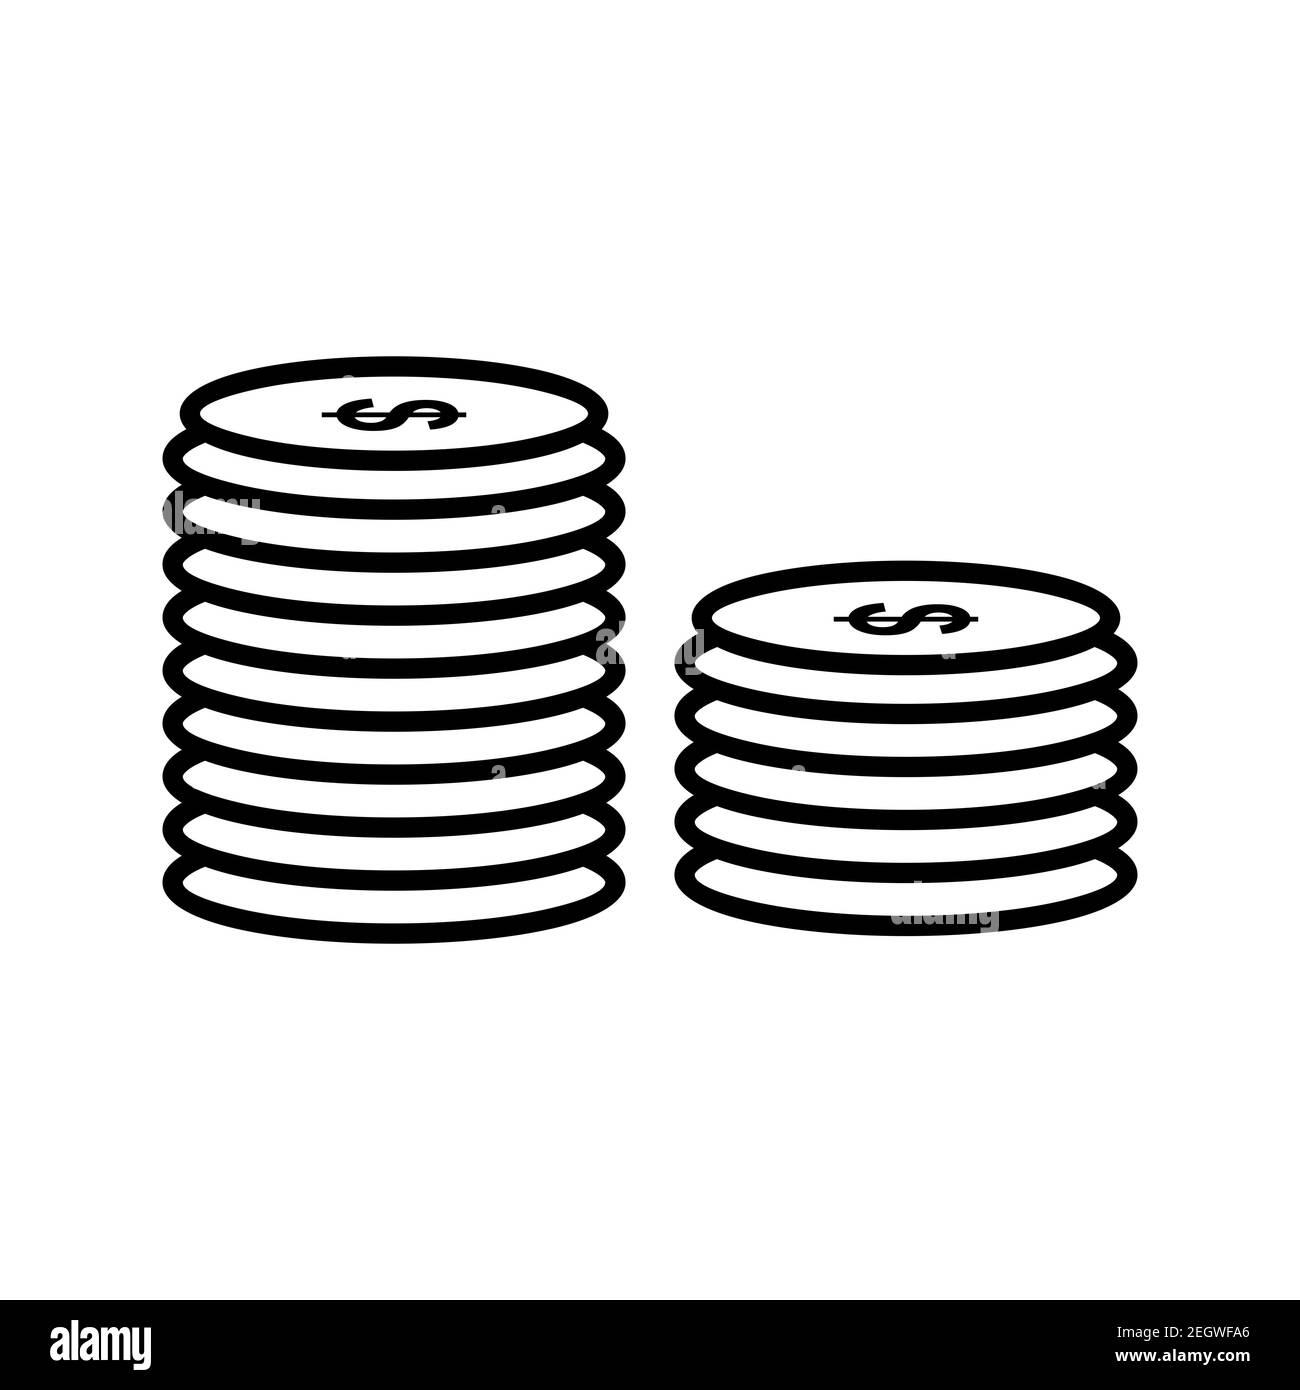 Illustration of a stack of coins line vector icon isolated on white background Stock Photo